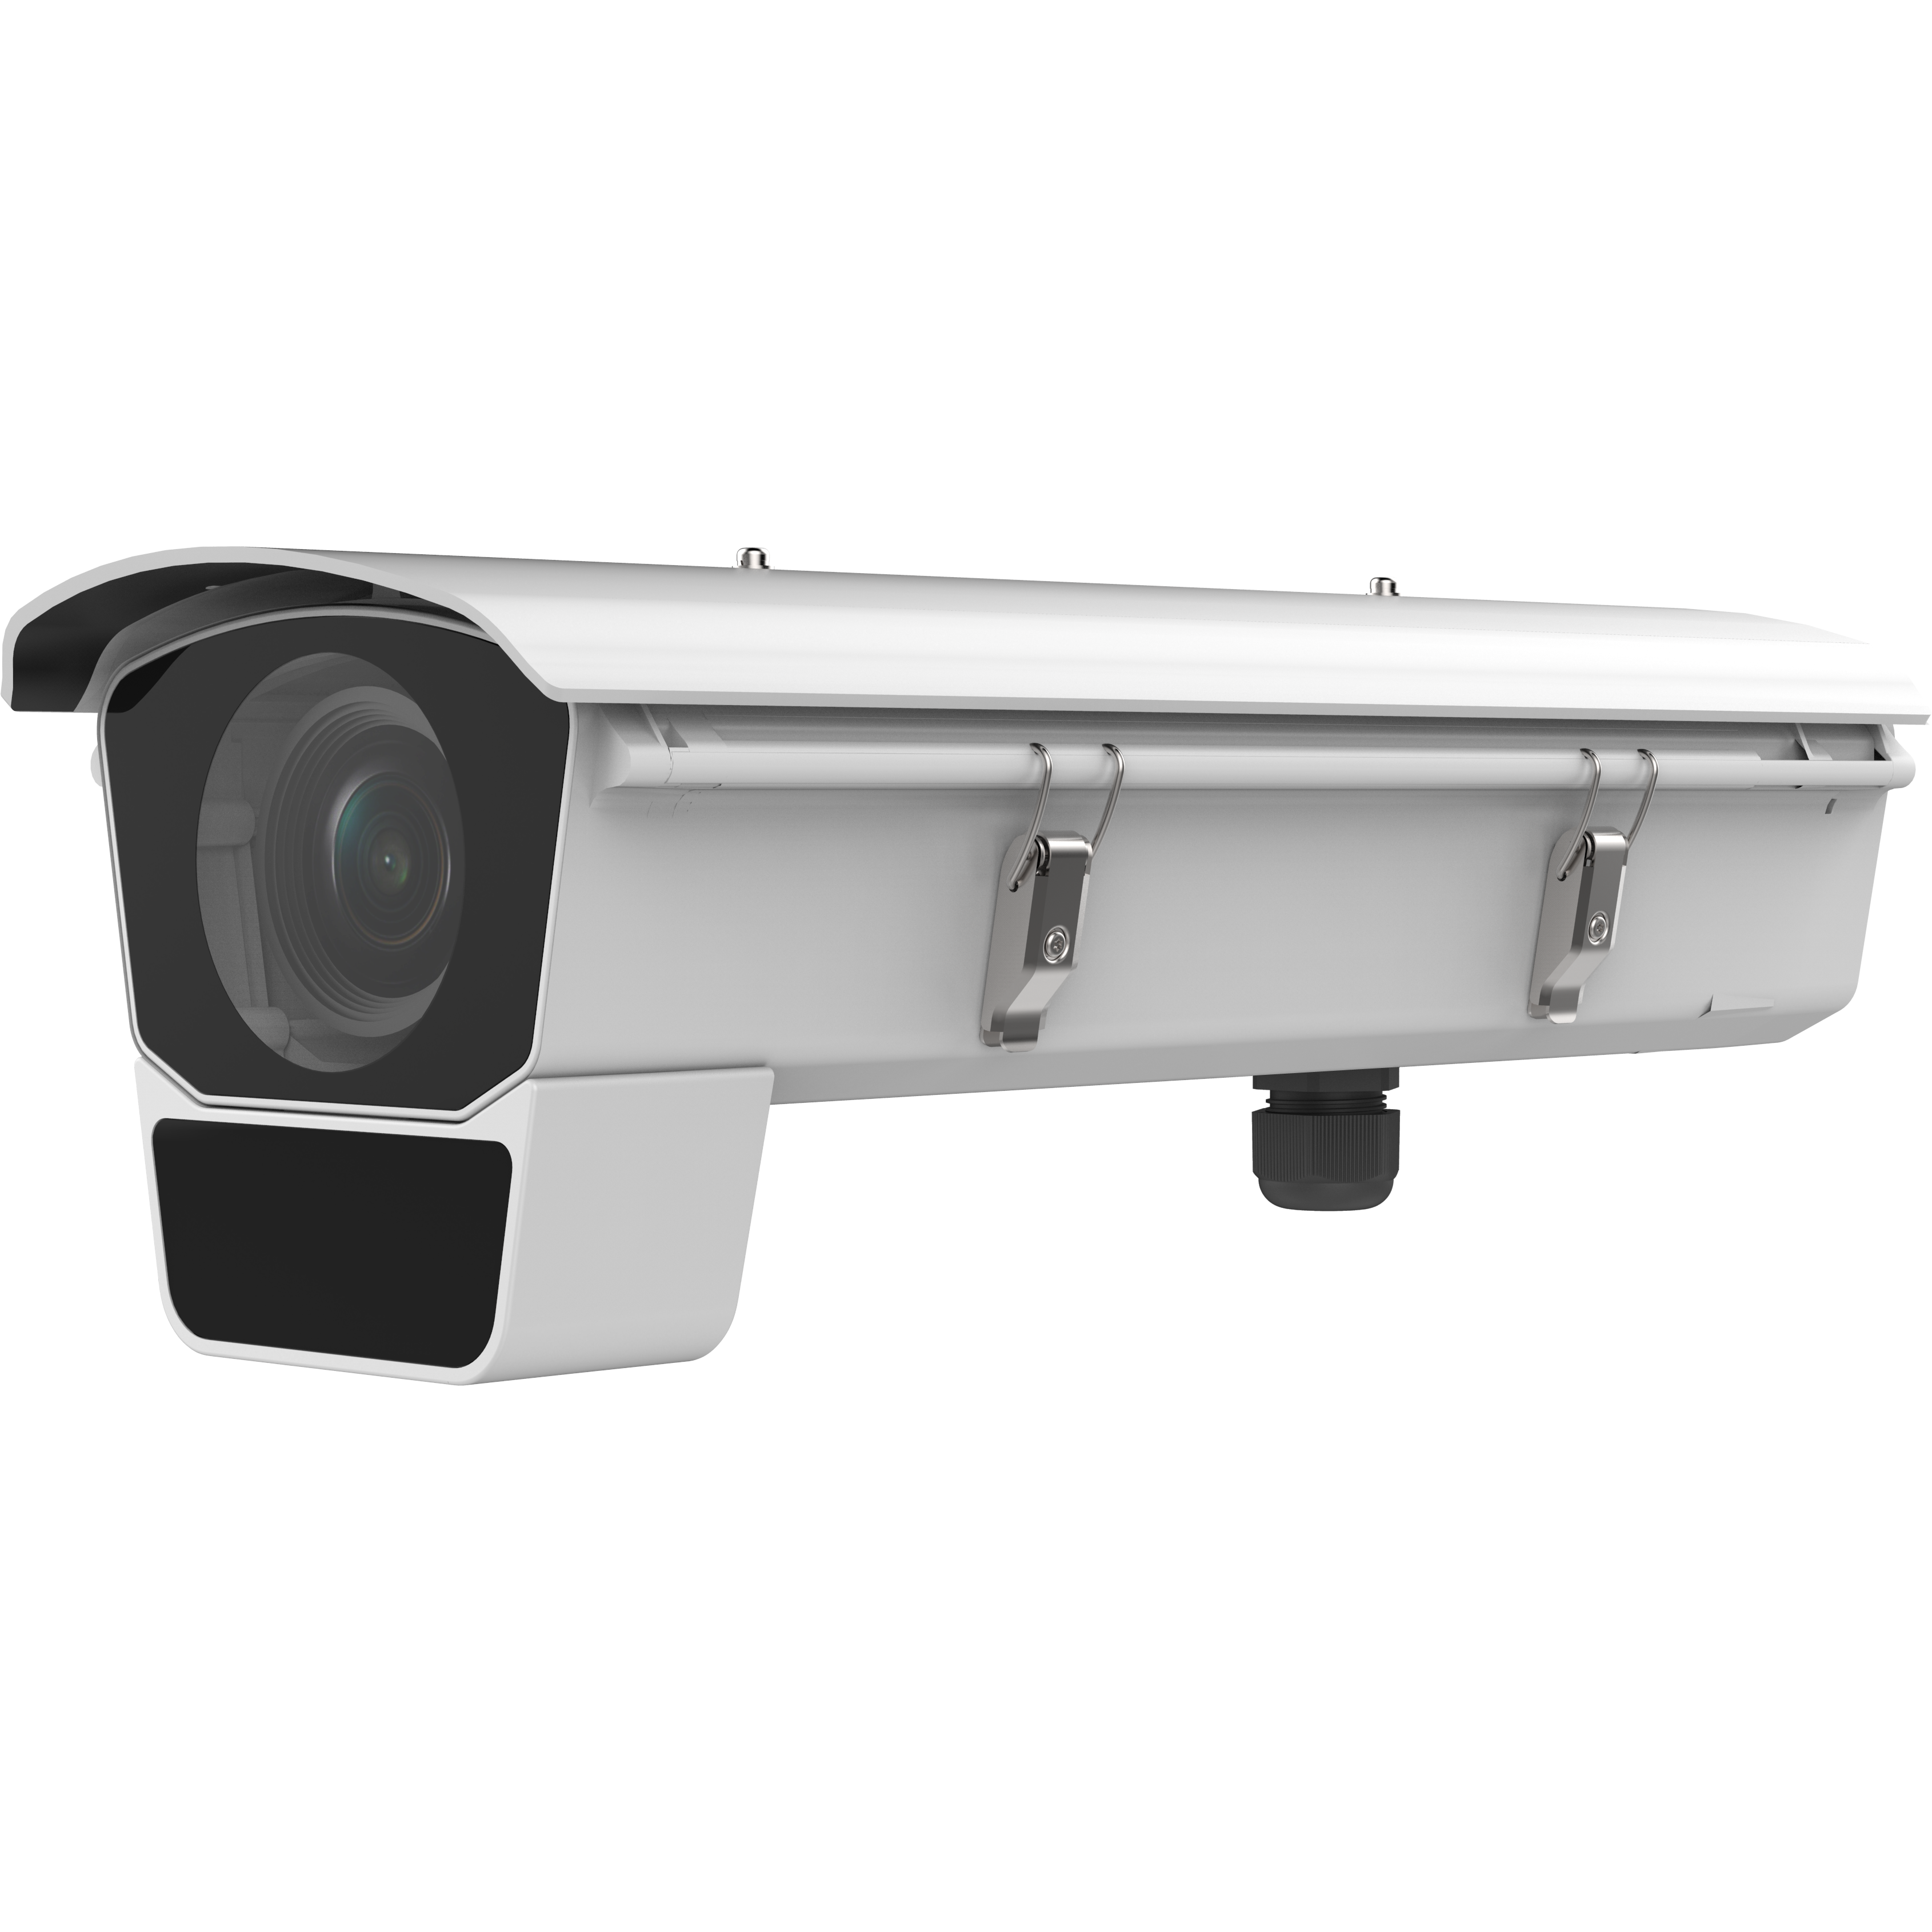 HIKVISION iDS-2CD7046G0/E-IHSY(/F11)(R)